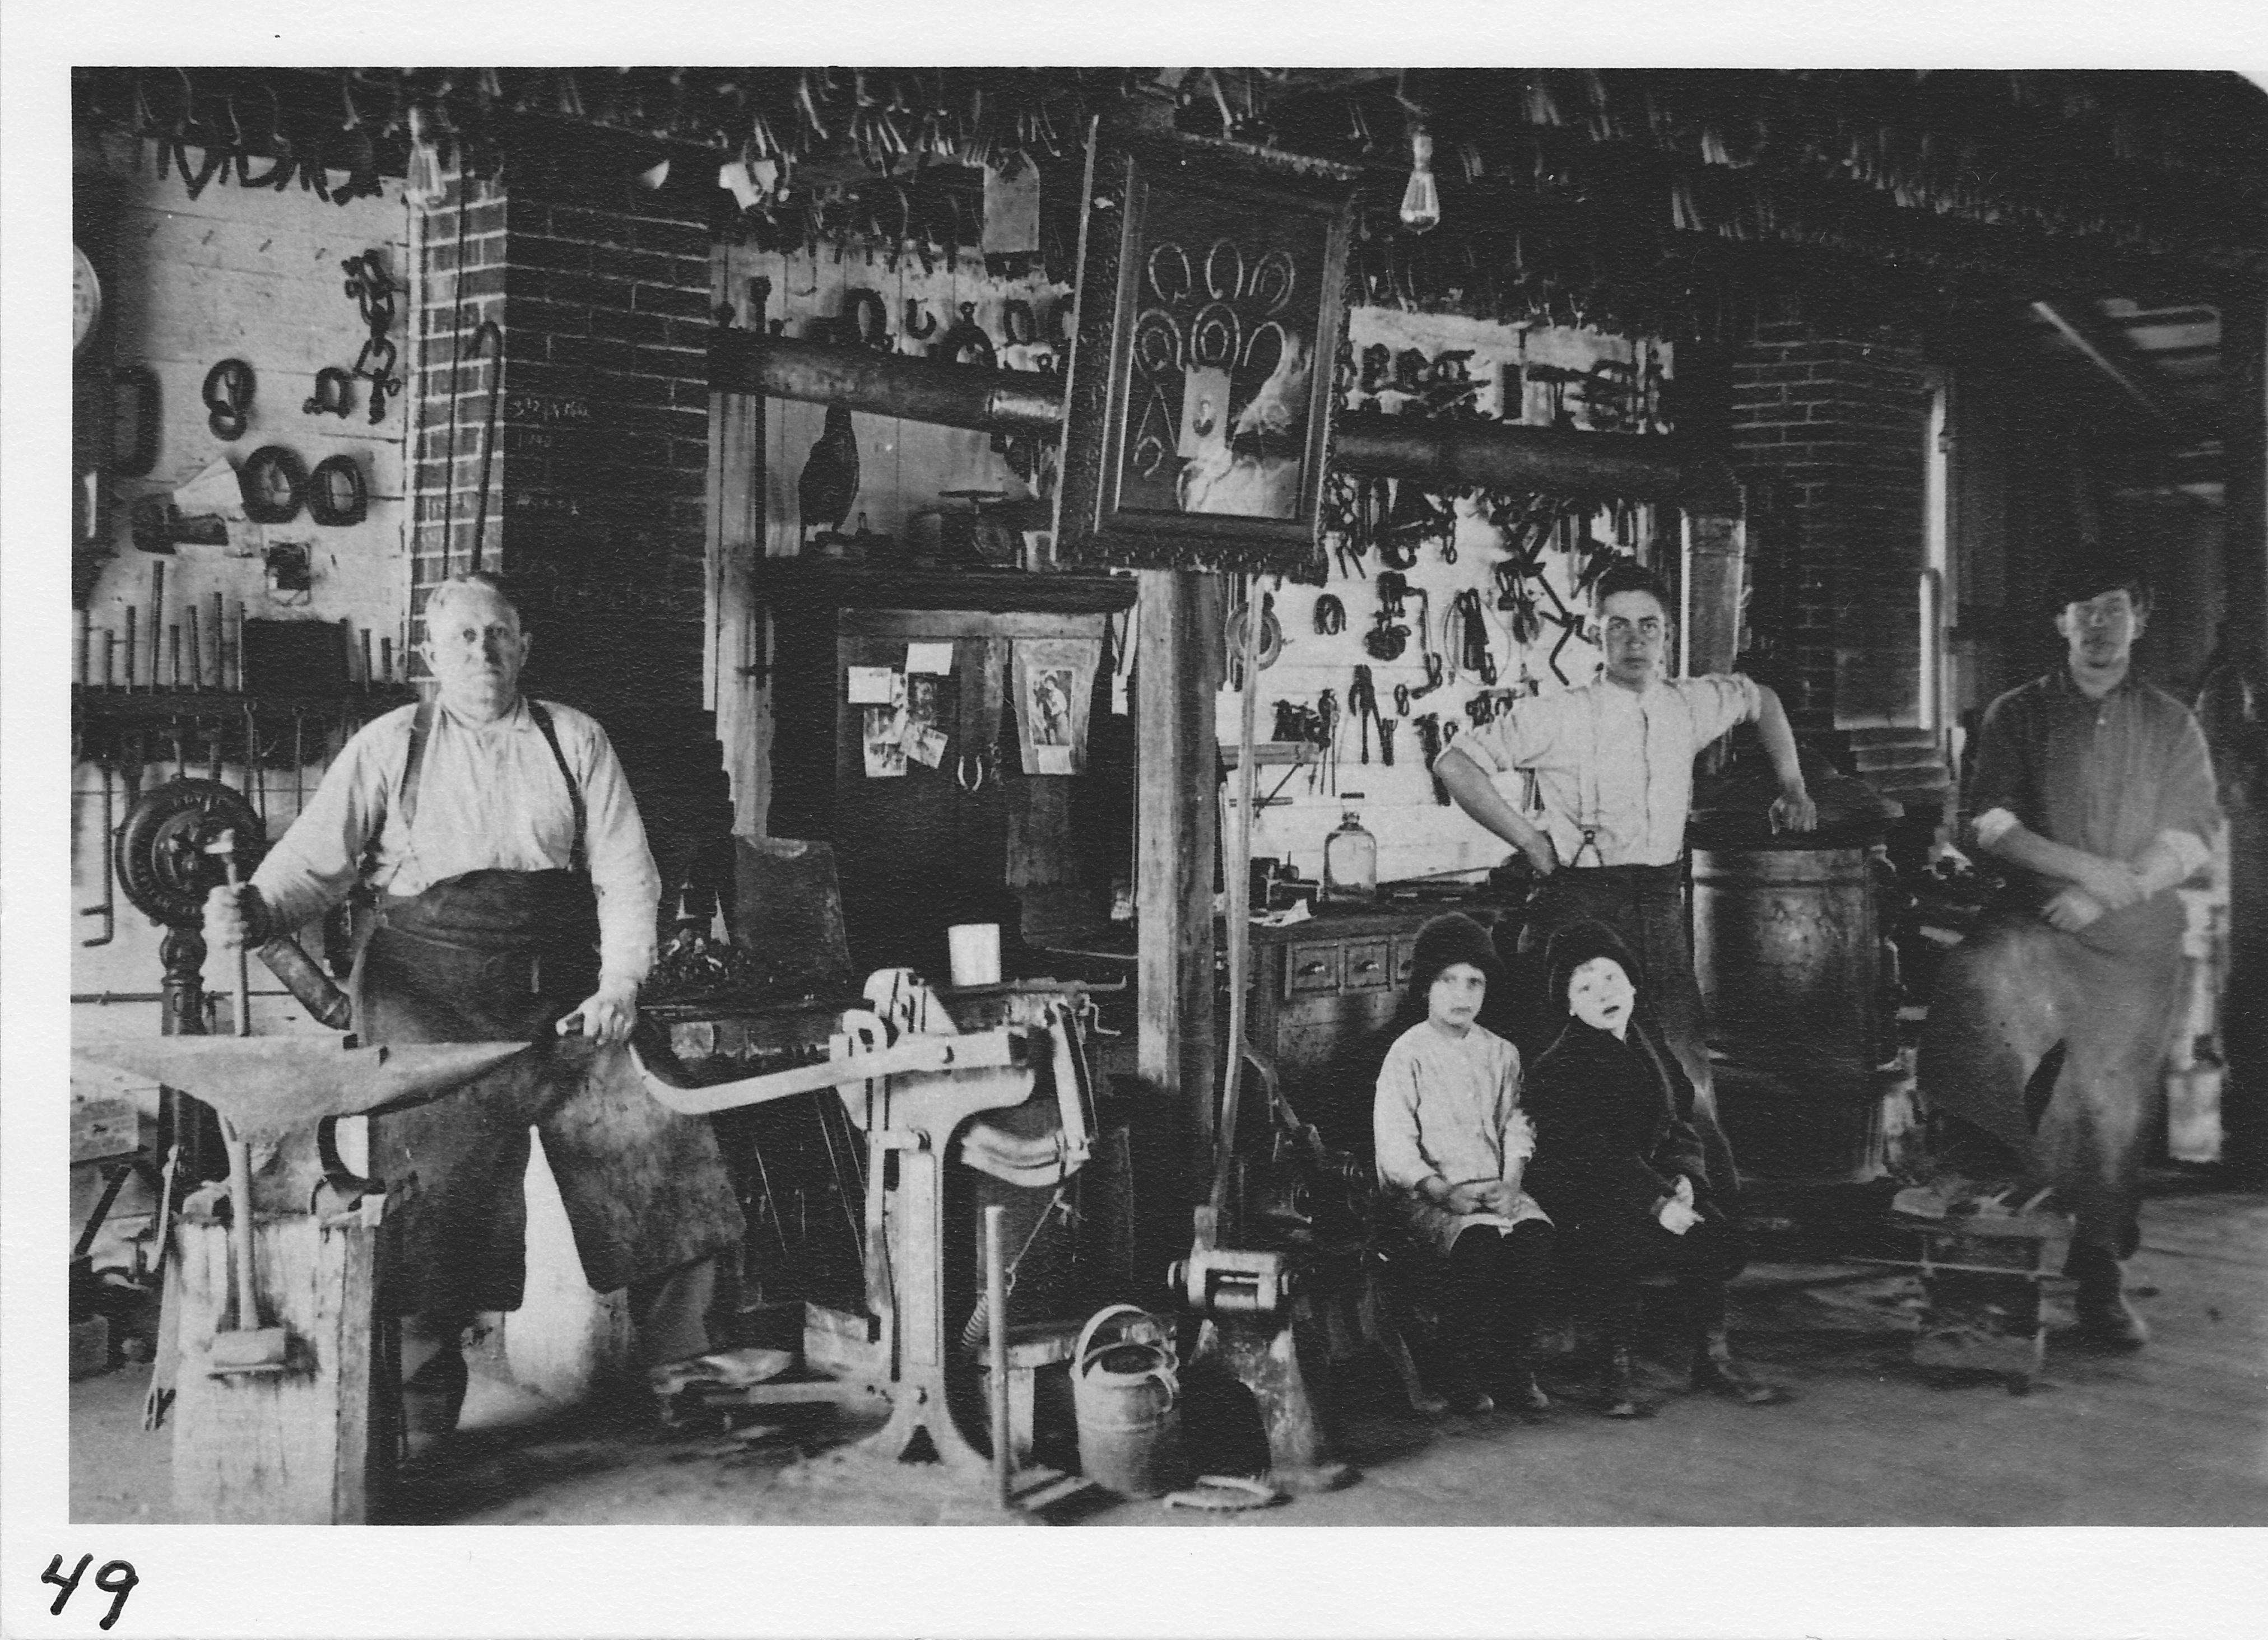 Pete Stetten’s Blacksmith Shop at  turn of century, located on Baker St.  Pete seated at left.